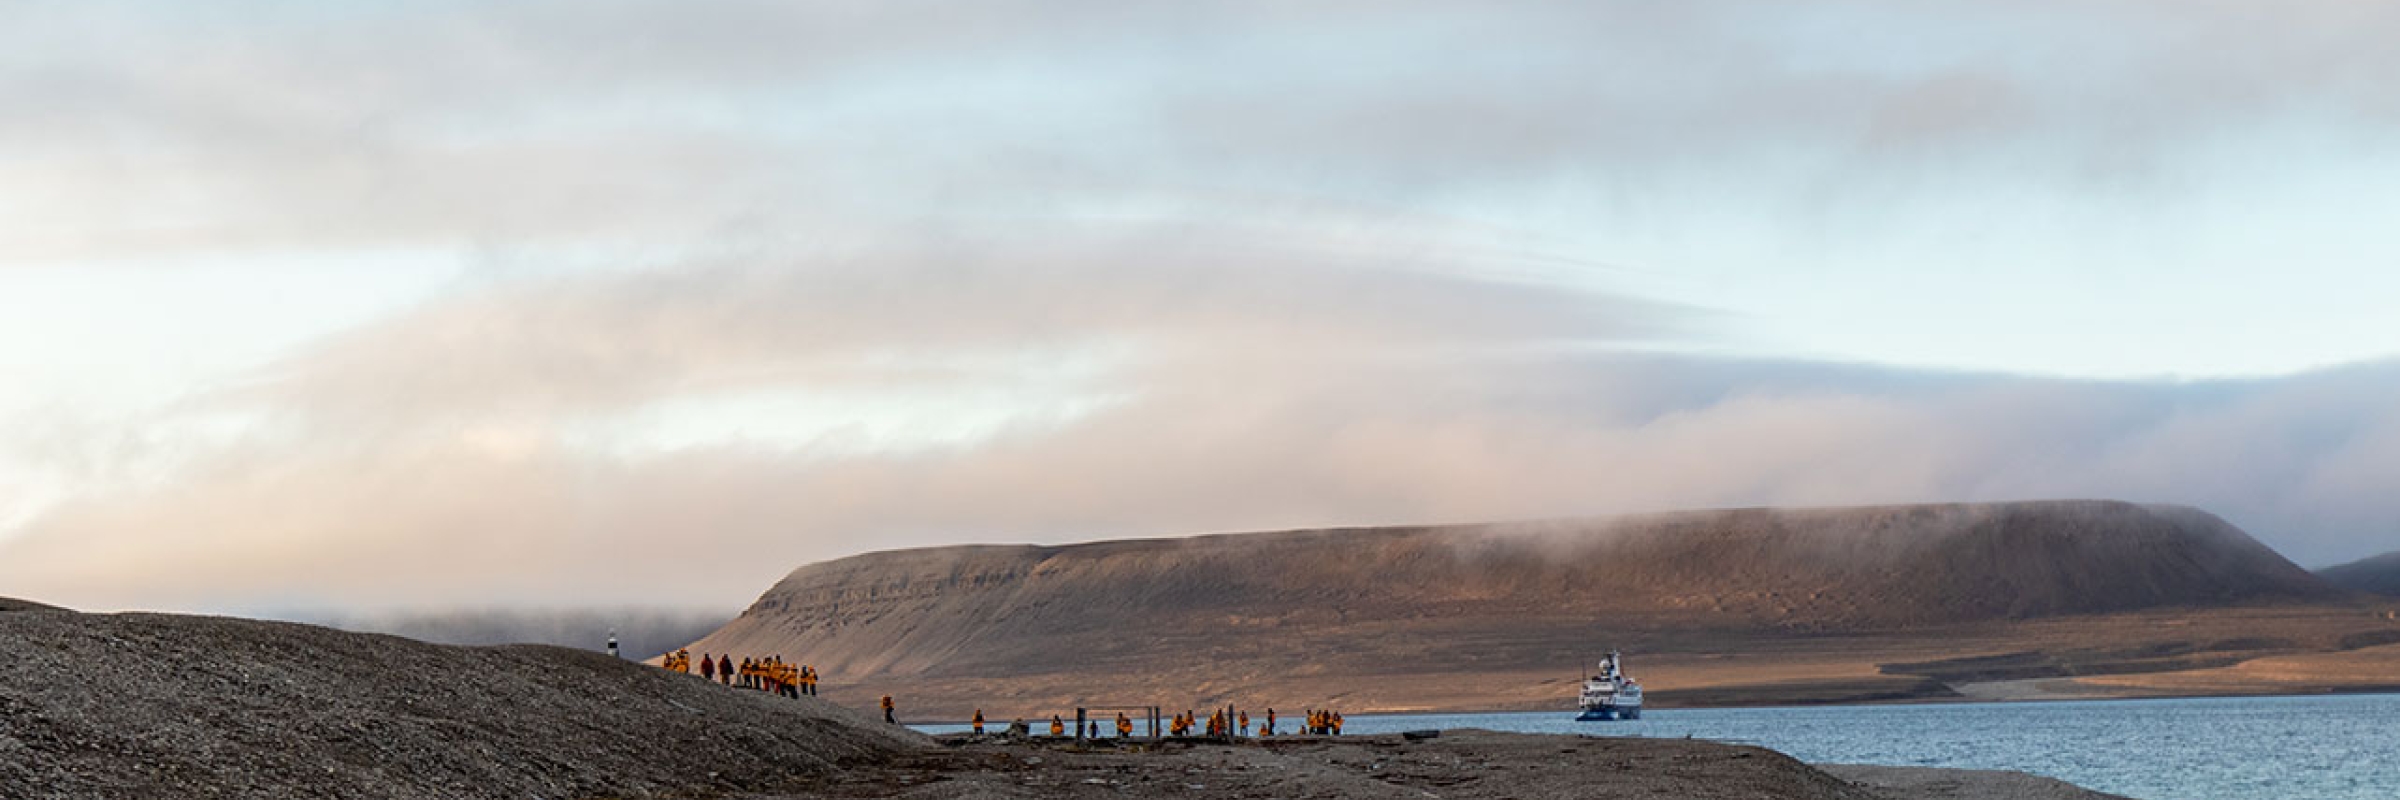 Guests exploring Beechey Island - Photo by Michelle Sole